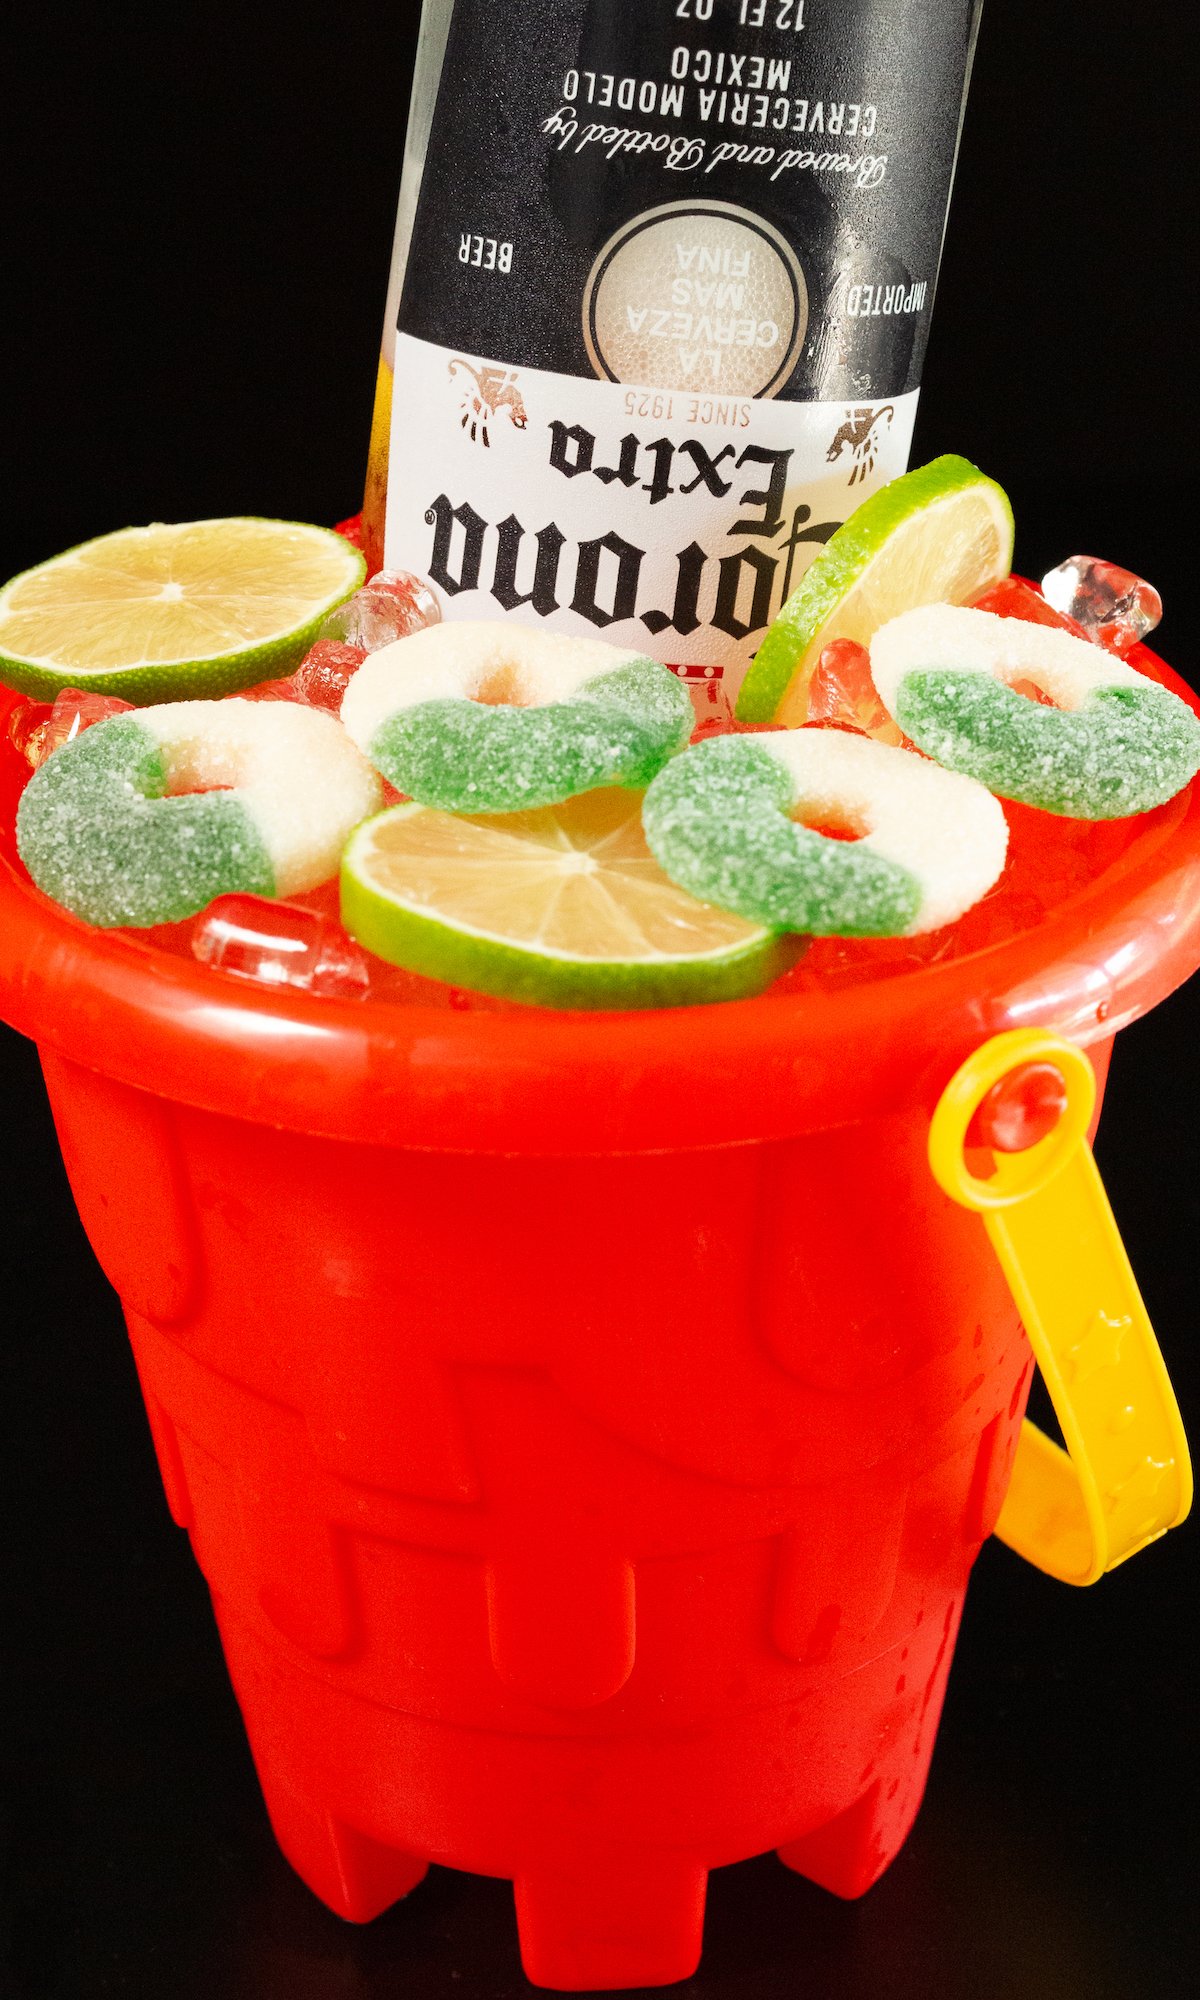 A red sand bucket filled with a tequila cocktail that's topped with sliced limes, green apple gummy rings, and a Mexican beer.